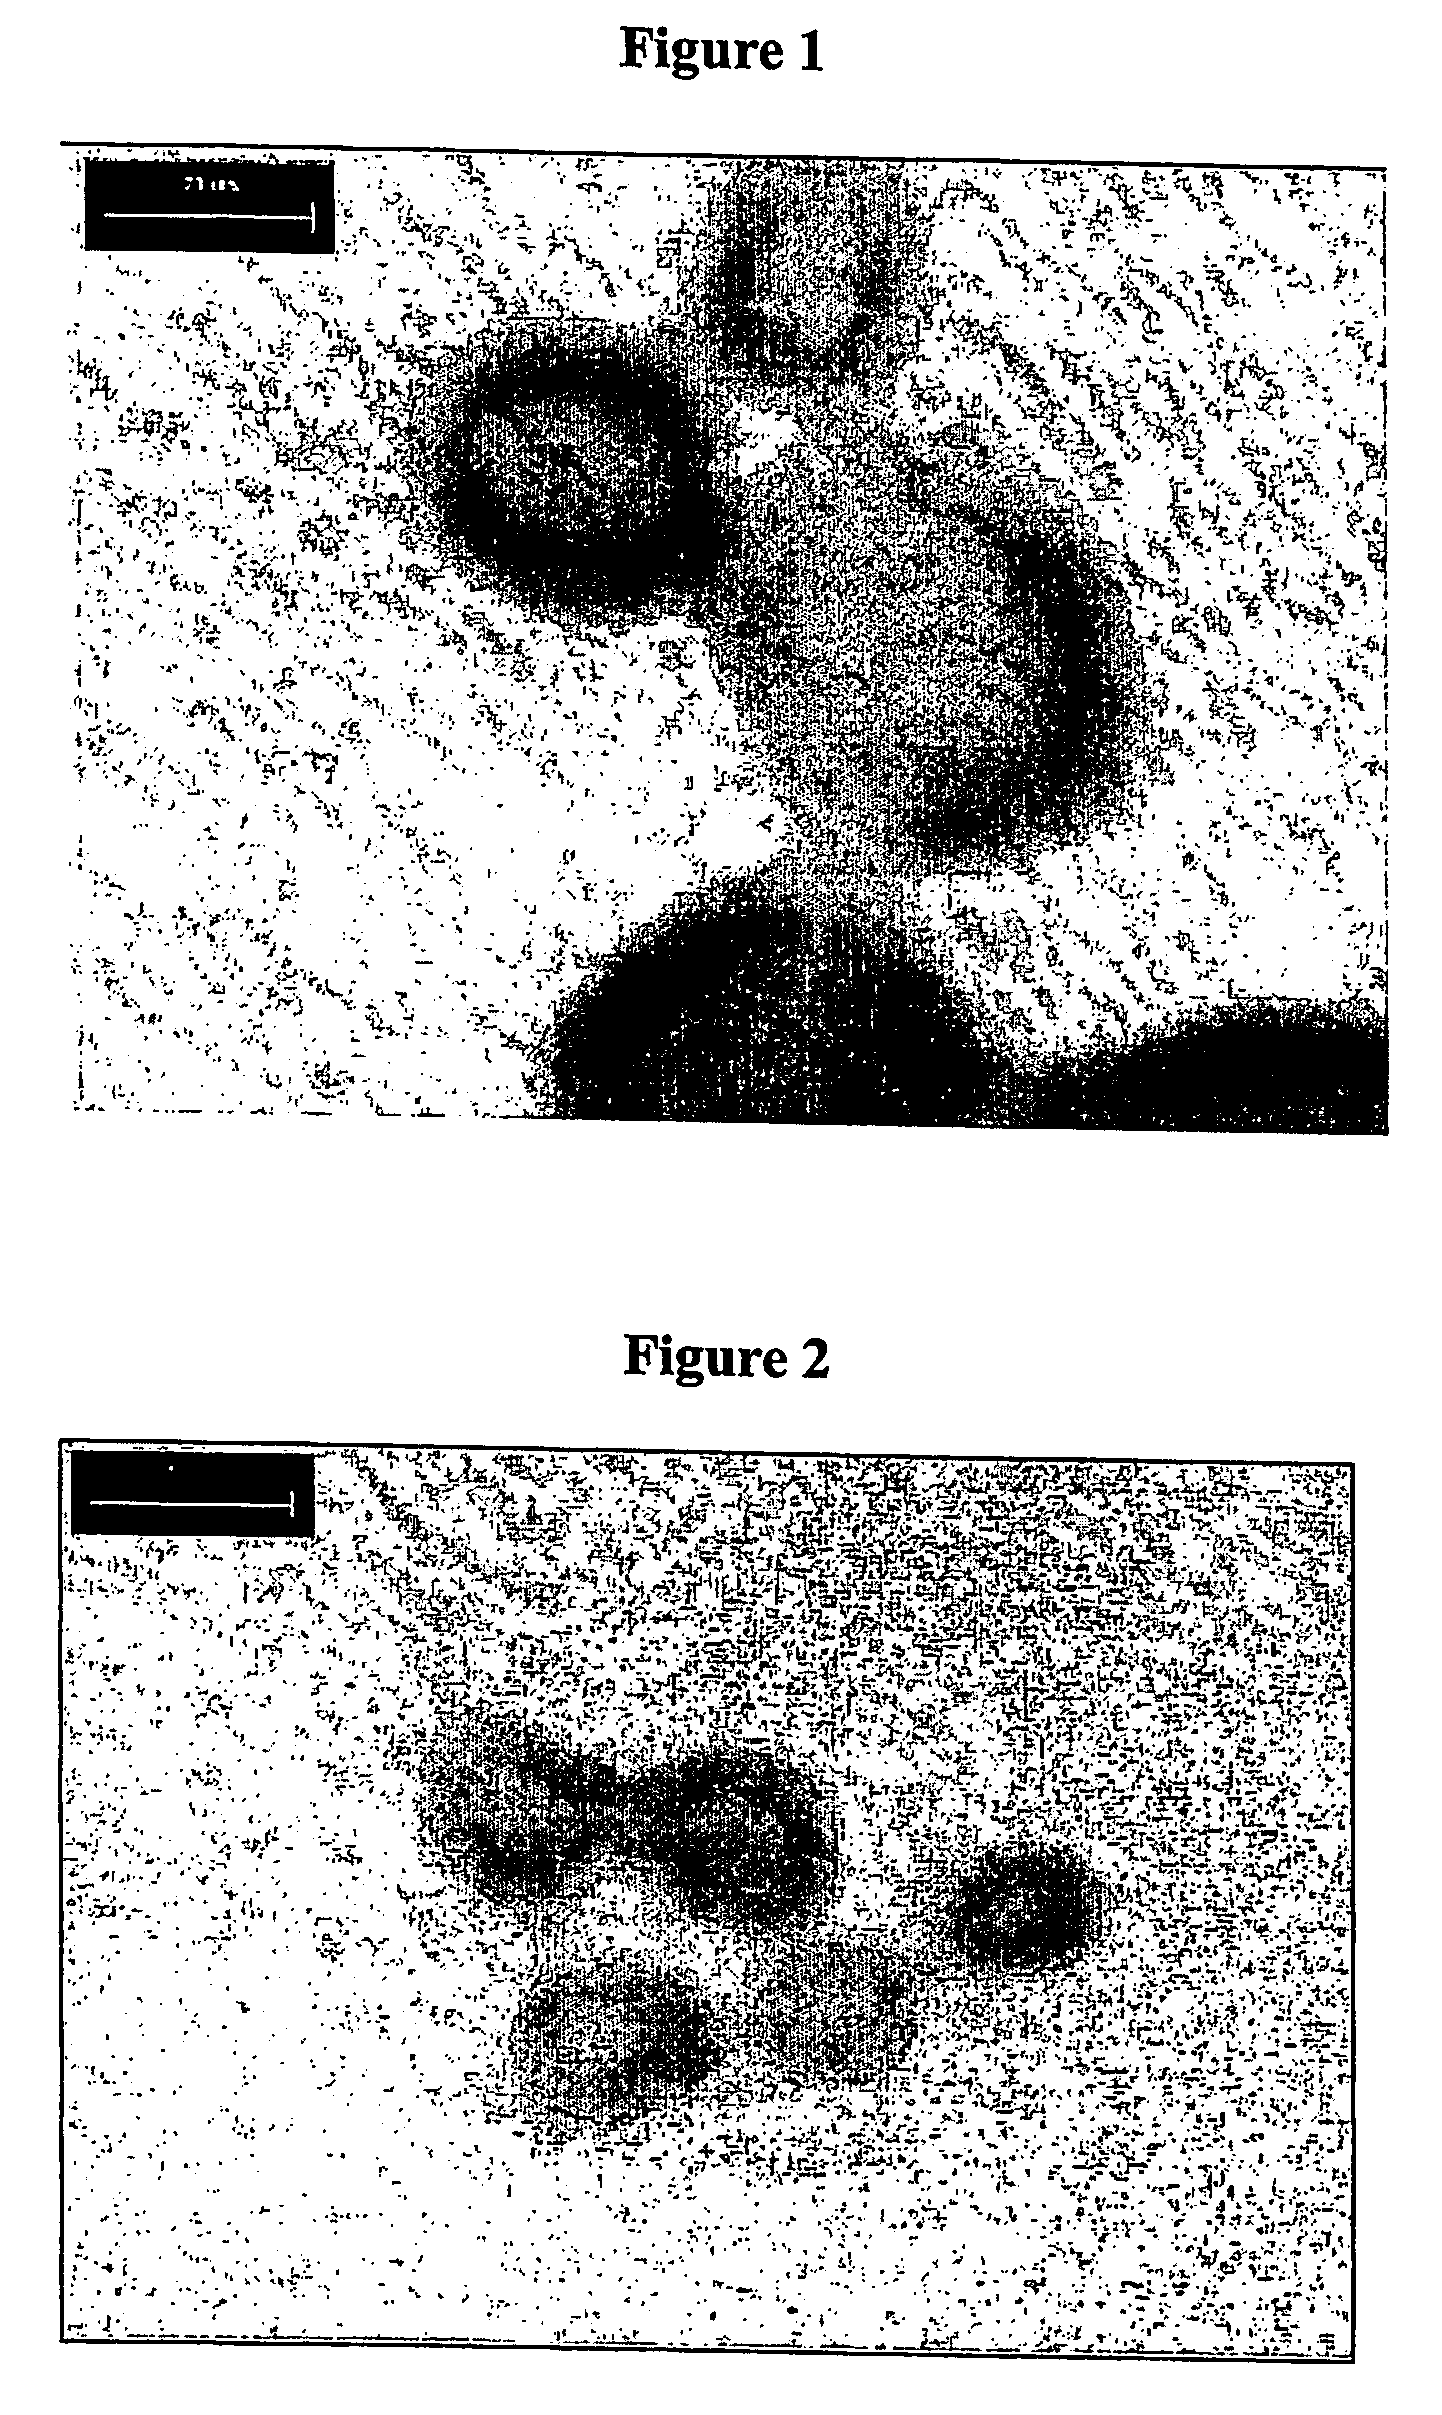 Method for preparing microcapsule by miniemulsion polymerization